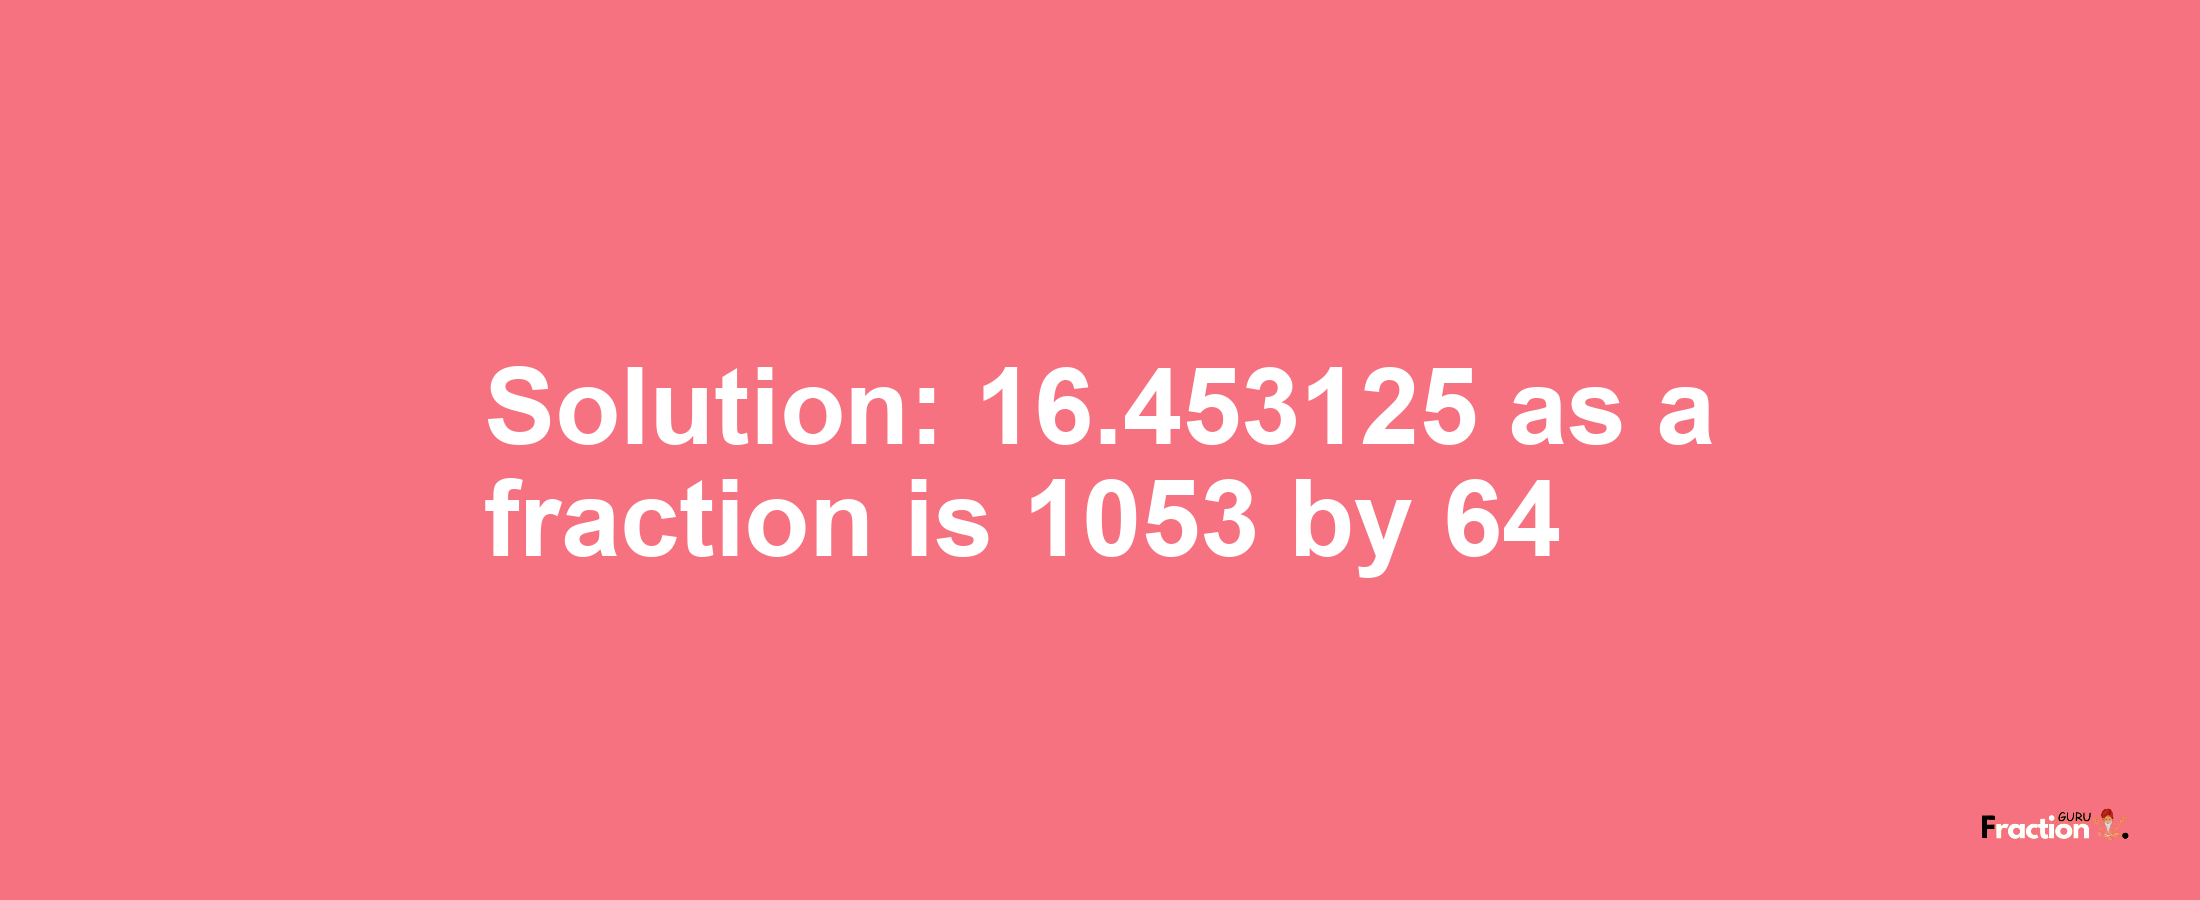 Solution:16.453125 as a fraction is 1053/64